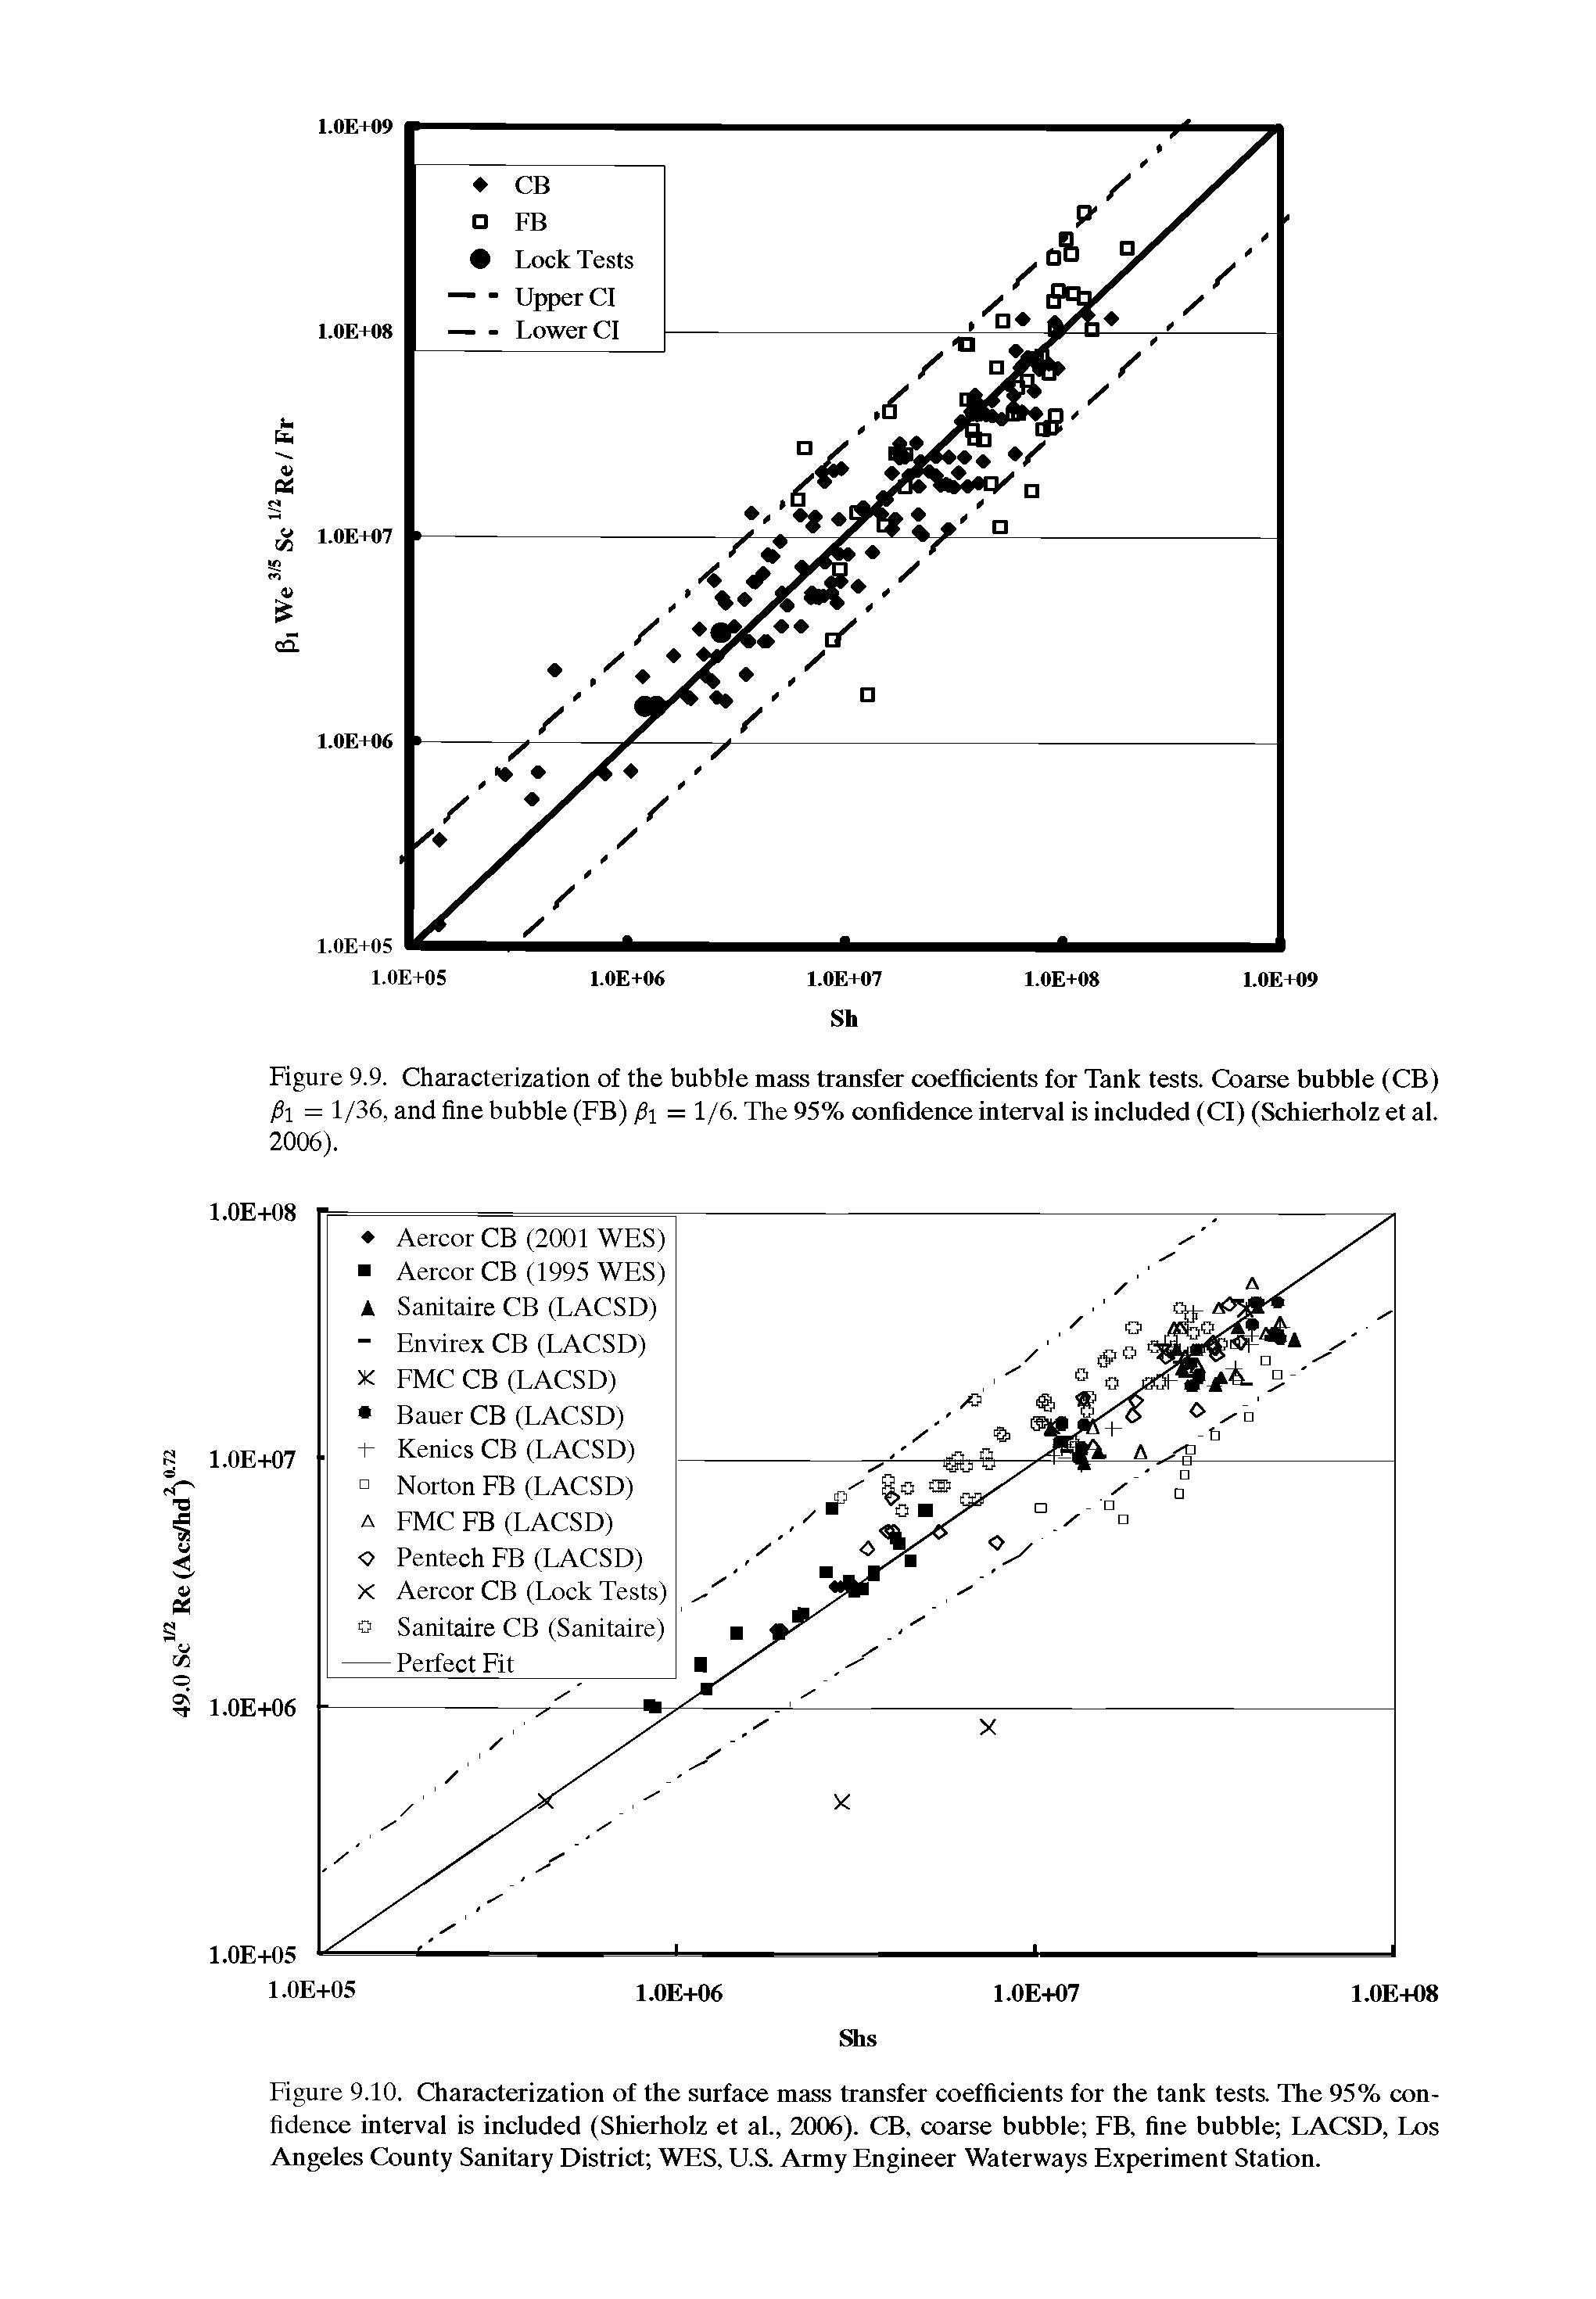 Figure 9.9. Characterization of the bubble mass transfer coefficients for Tank tests. Coarse bubble (CB) j6i = 1/36, and fine bubble (FB) = 1/6. The 95% confidence interval is included (Cl) (Schierholz et al. 2006).